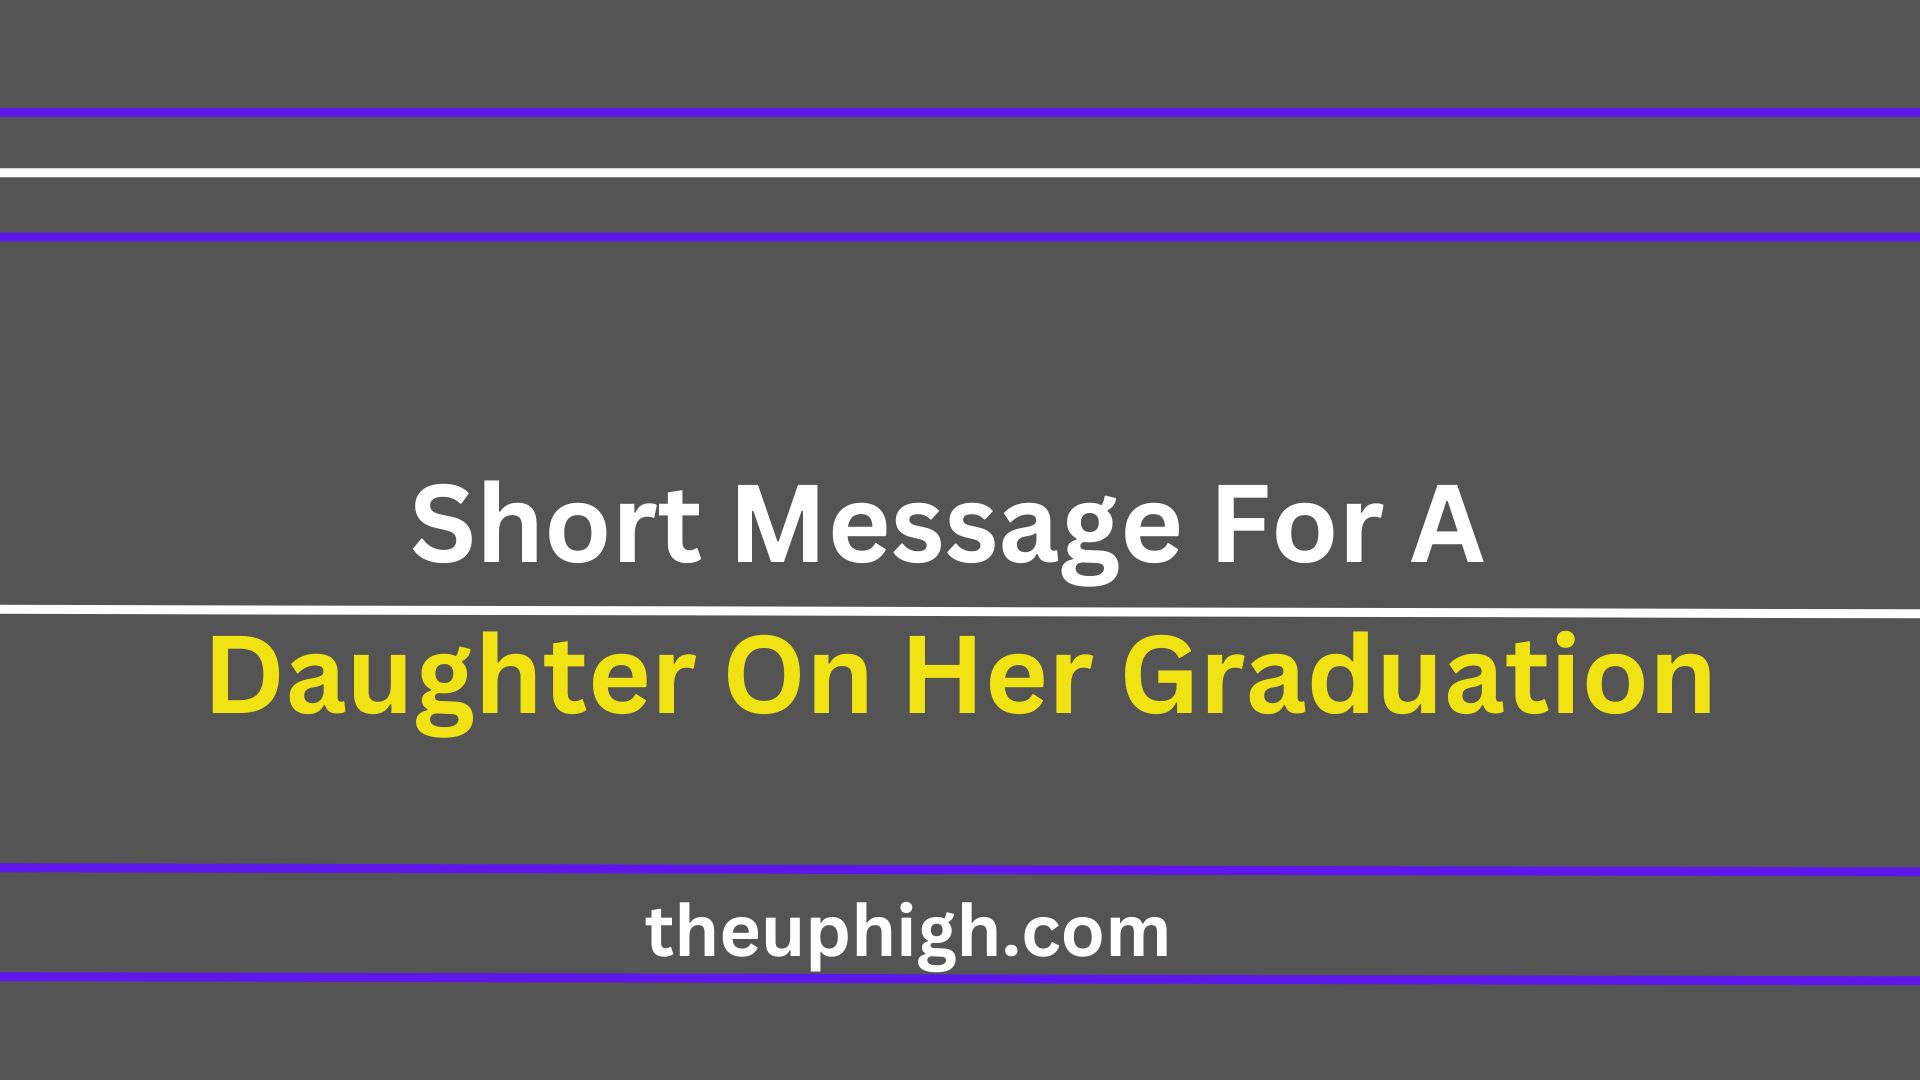 Short Message For a Daughter On Her Graduation